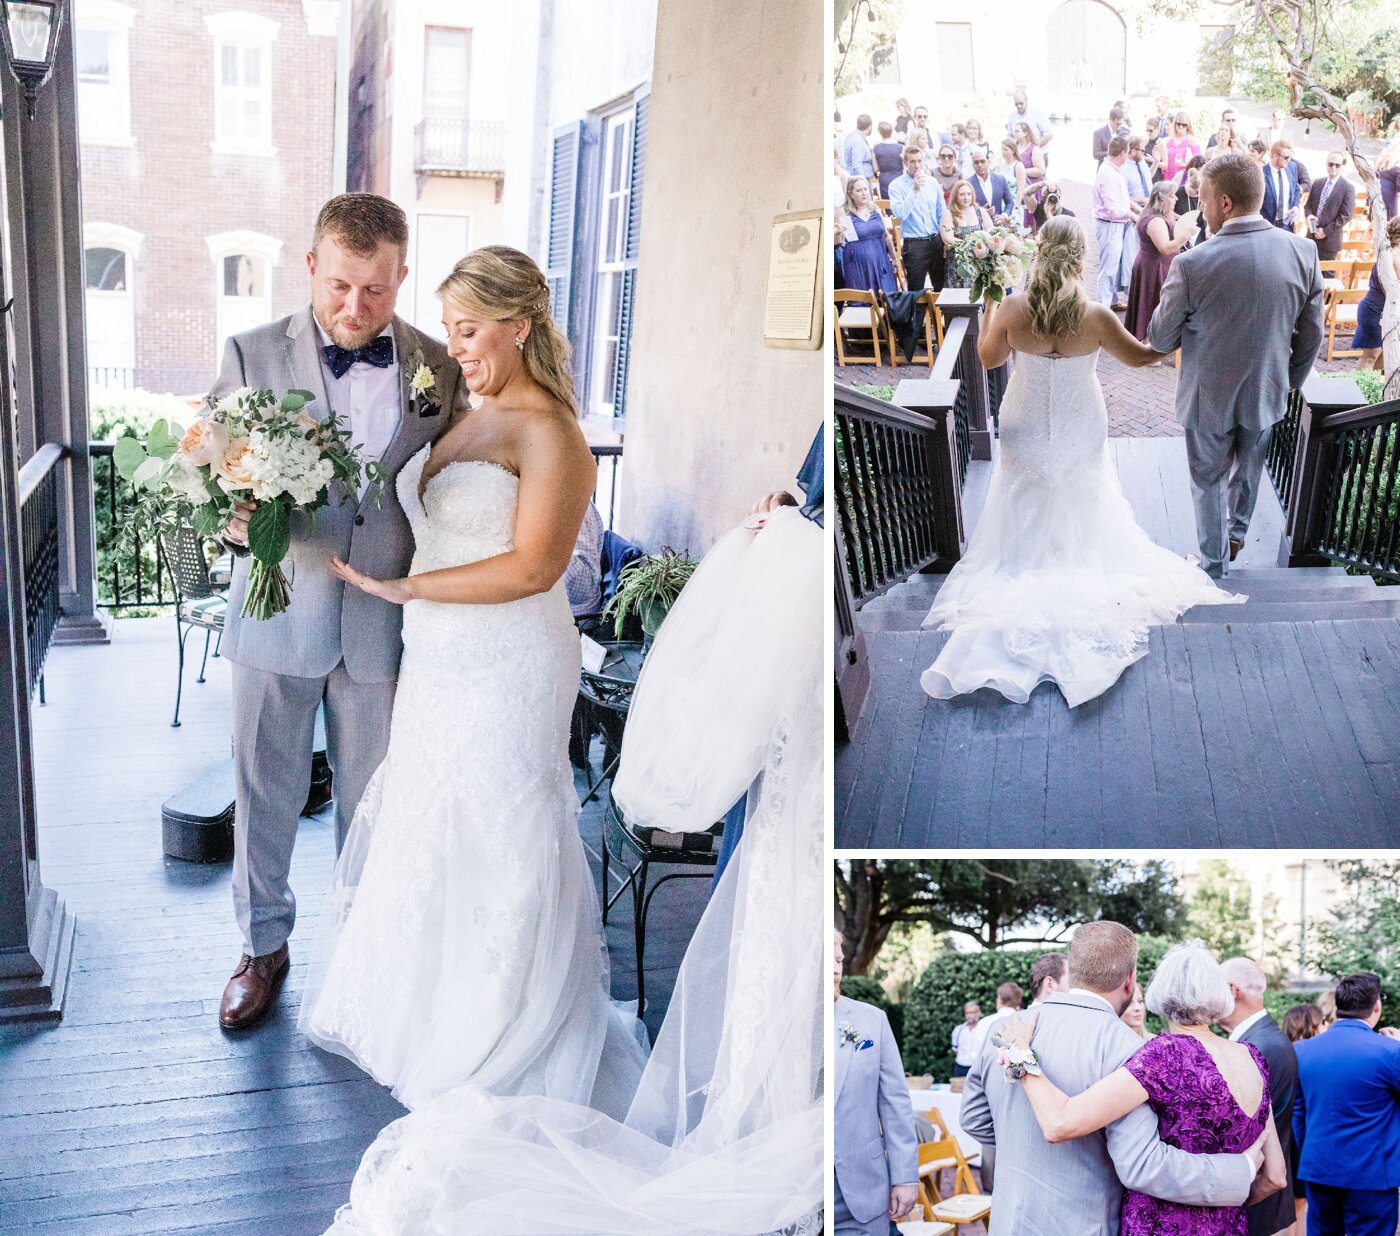 Morgan and Andrew’s wedding ceremony at Harper Fowlkes House in Savannah